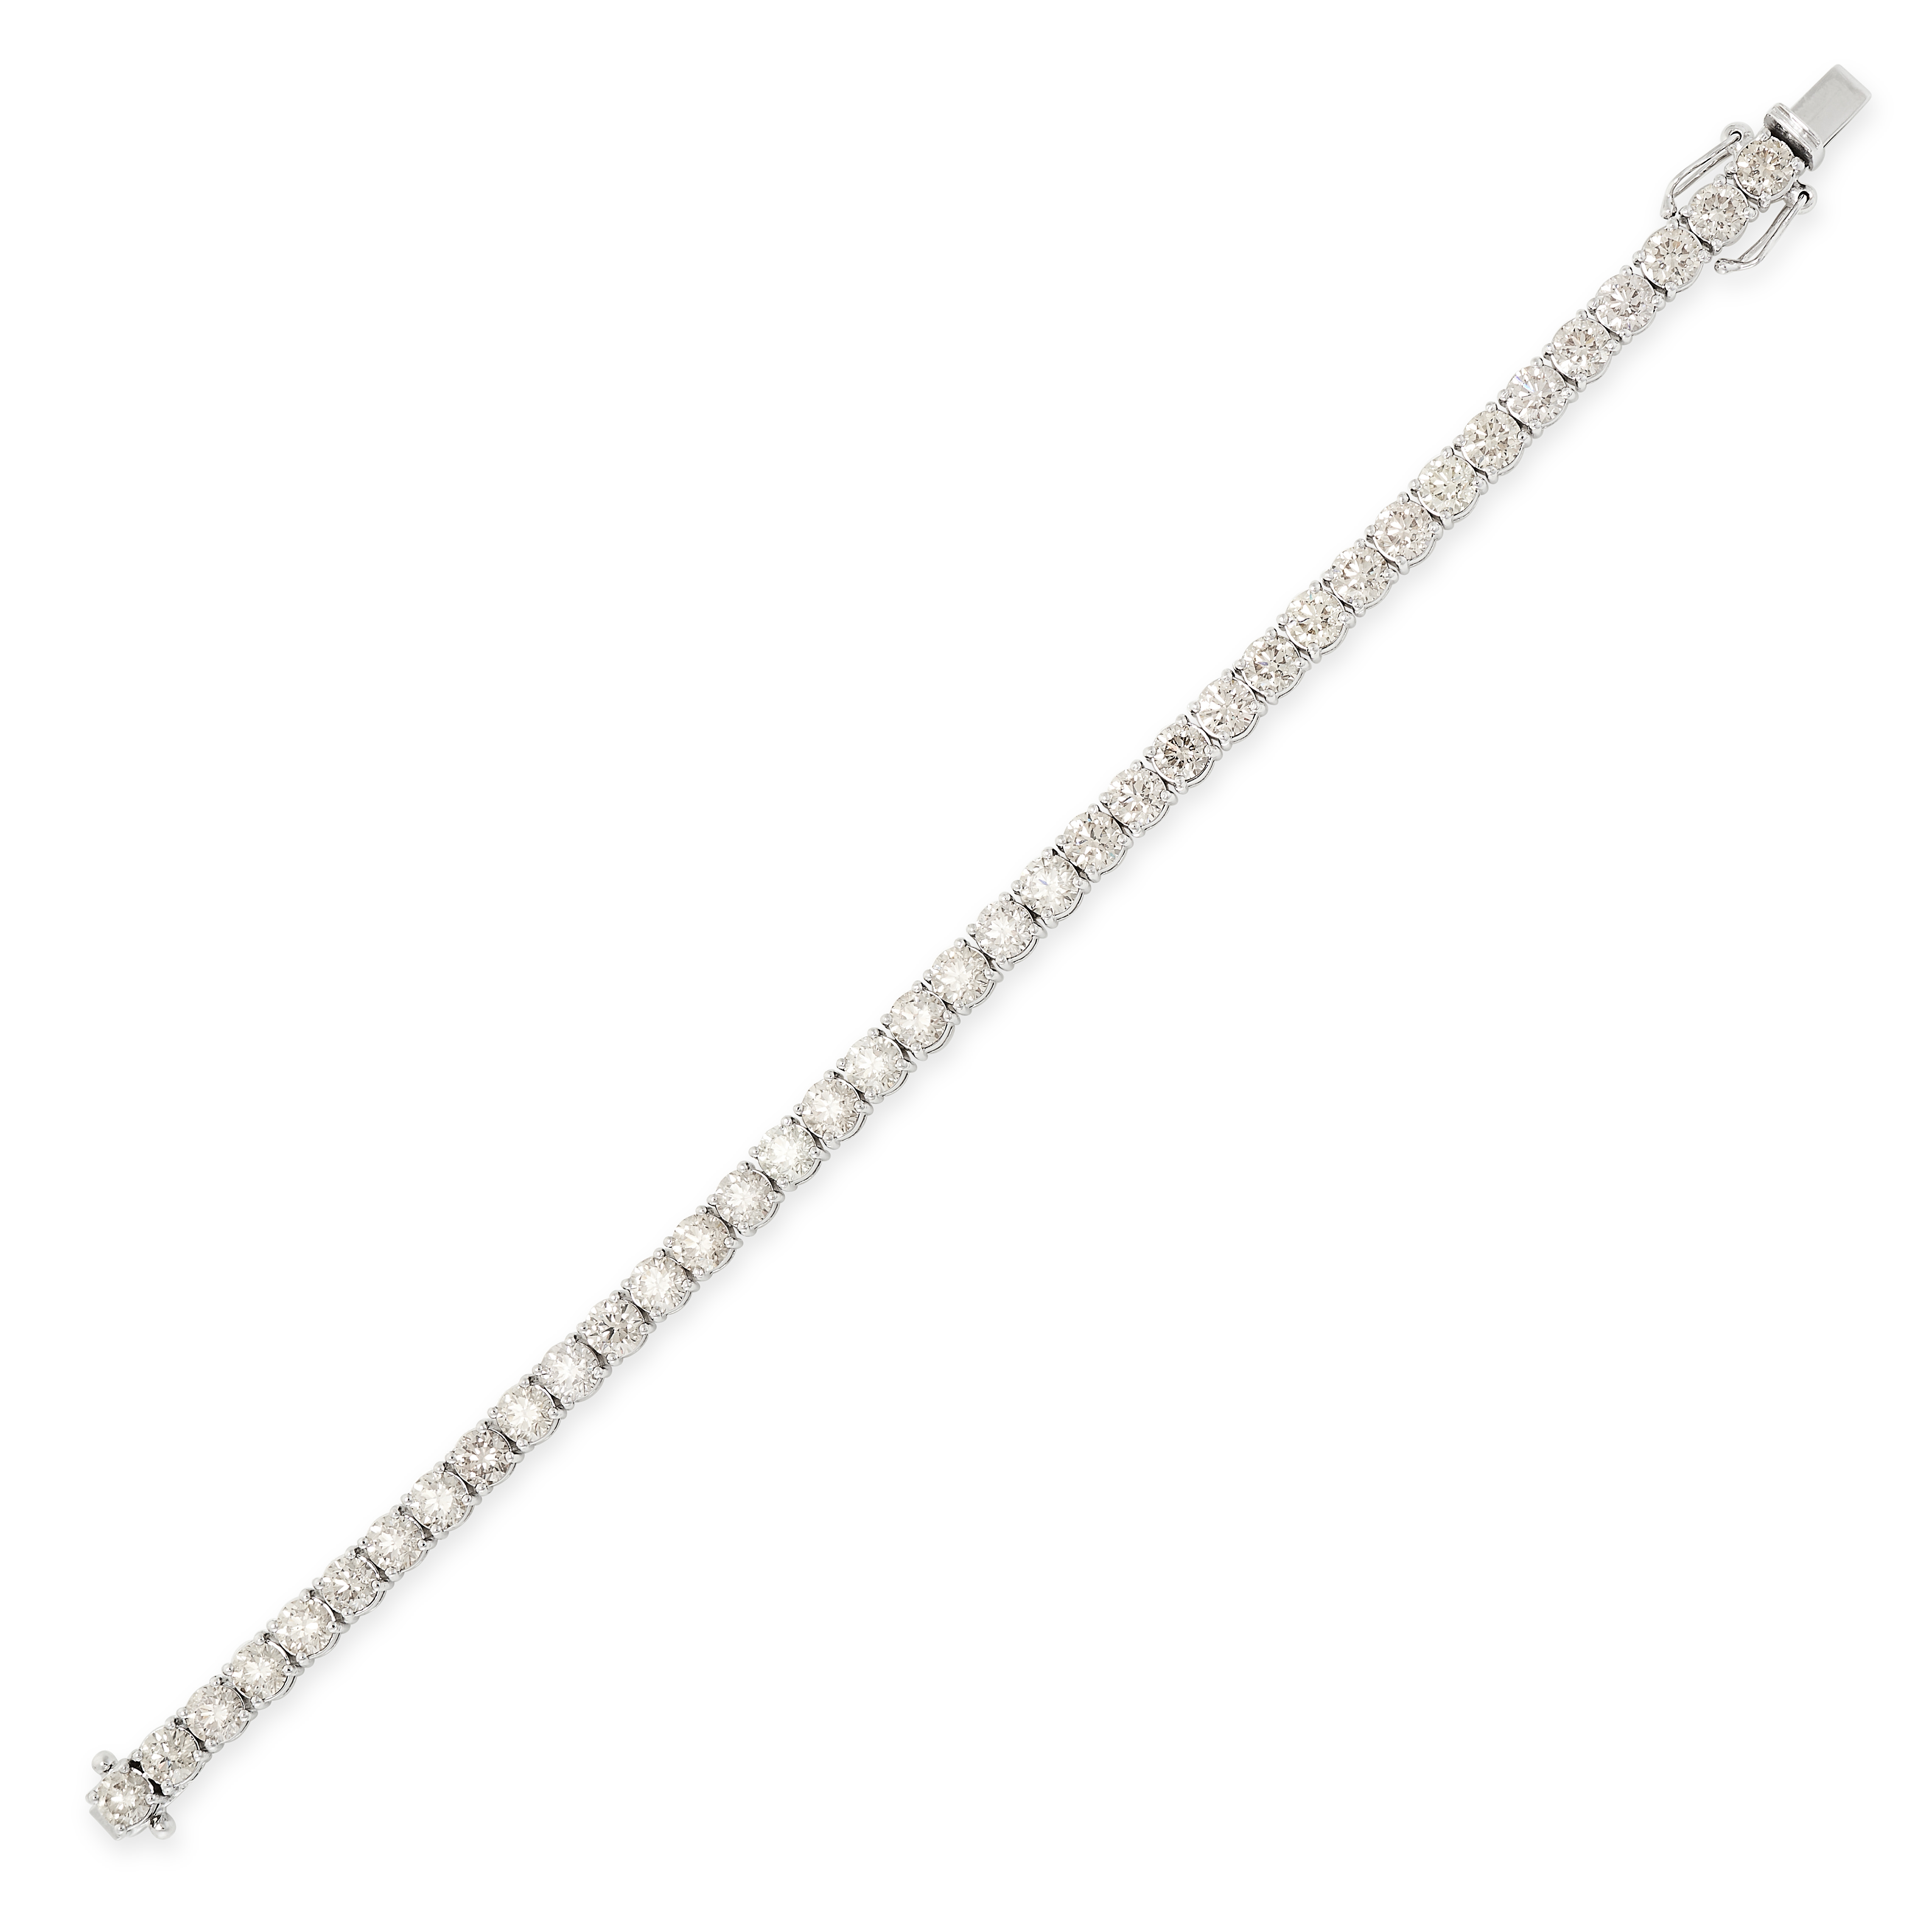 A 12.15 CARAT DIAMOND LINE BRACELET in 18ct white gold, comprising a single row of thirty-eight